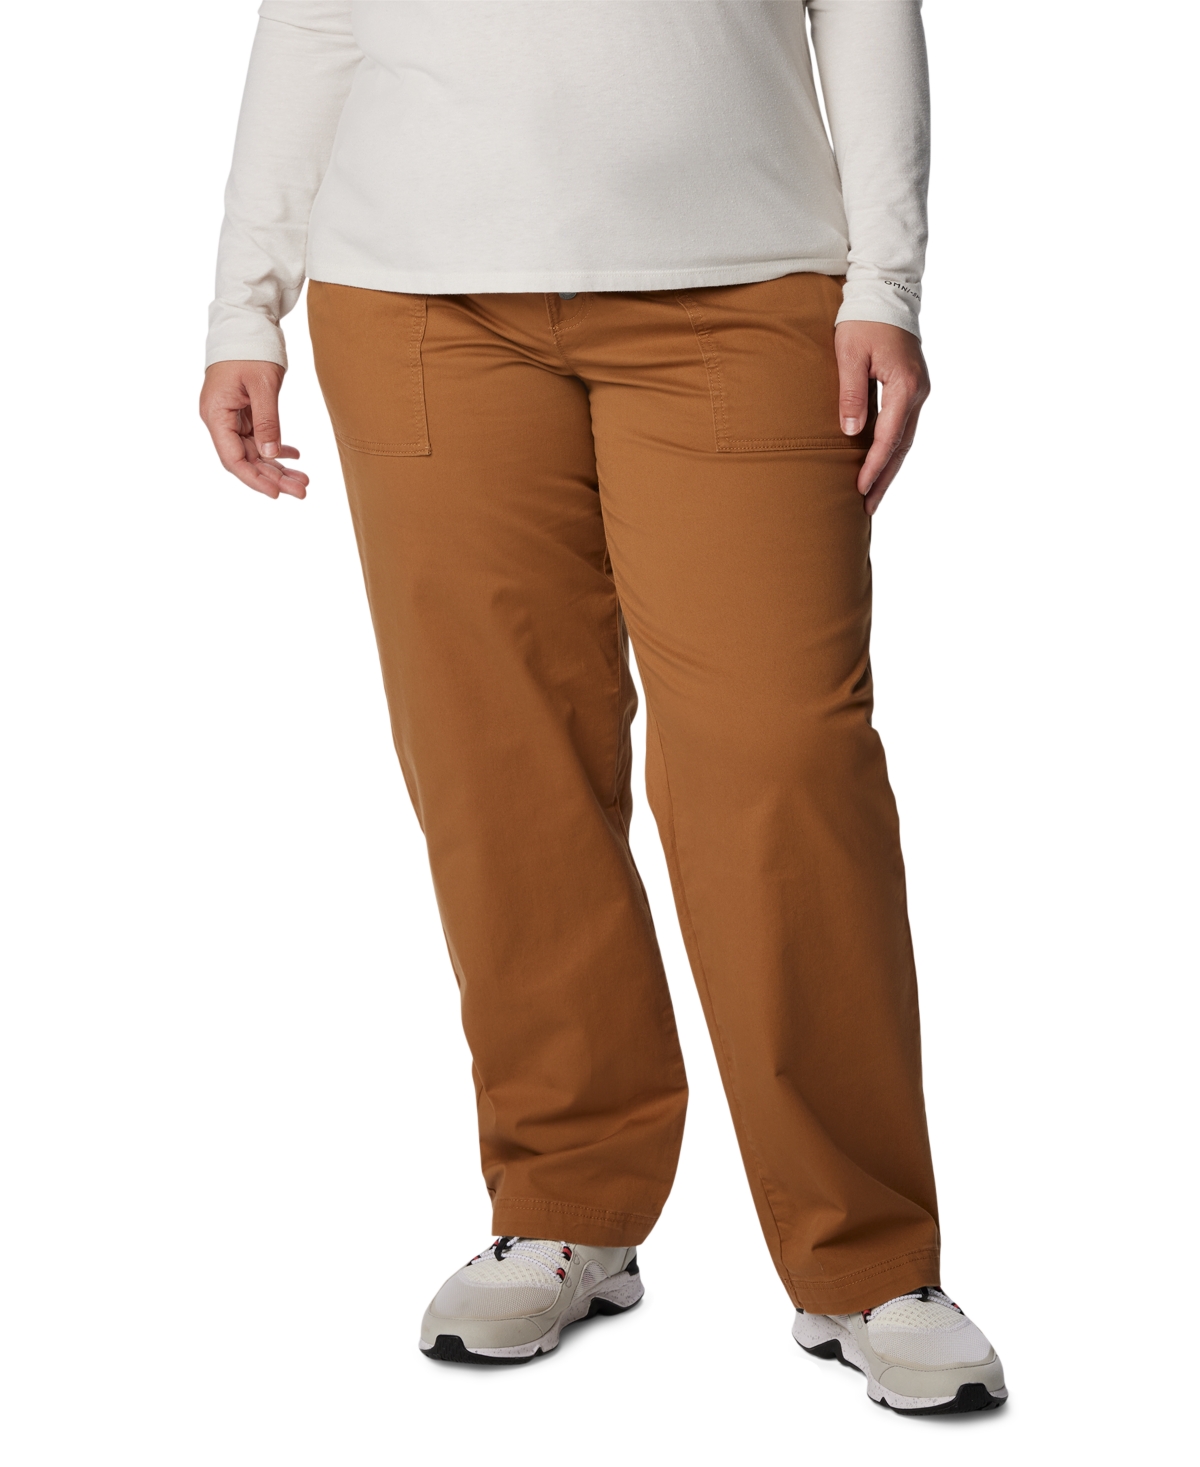 Plus Size Holly Hideaway Mid-Rise Button-Fly Pants - Camel Brown